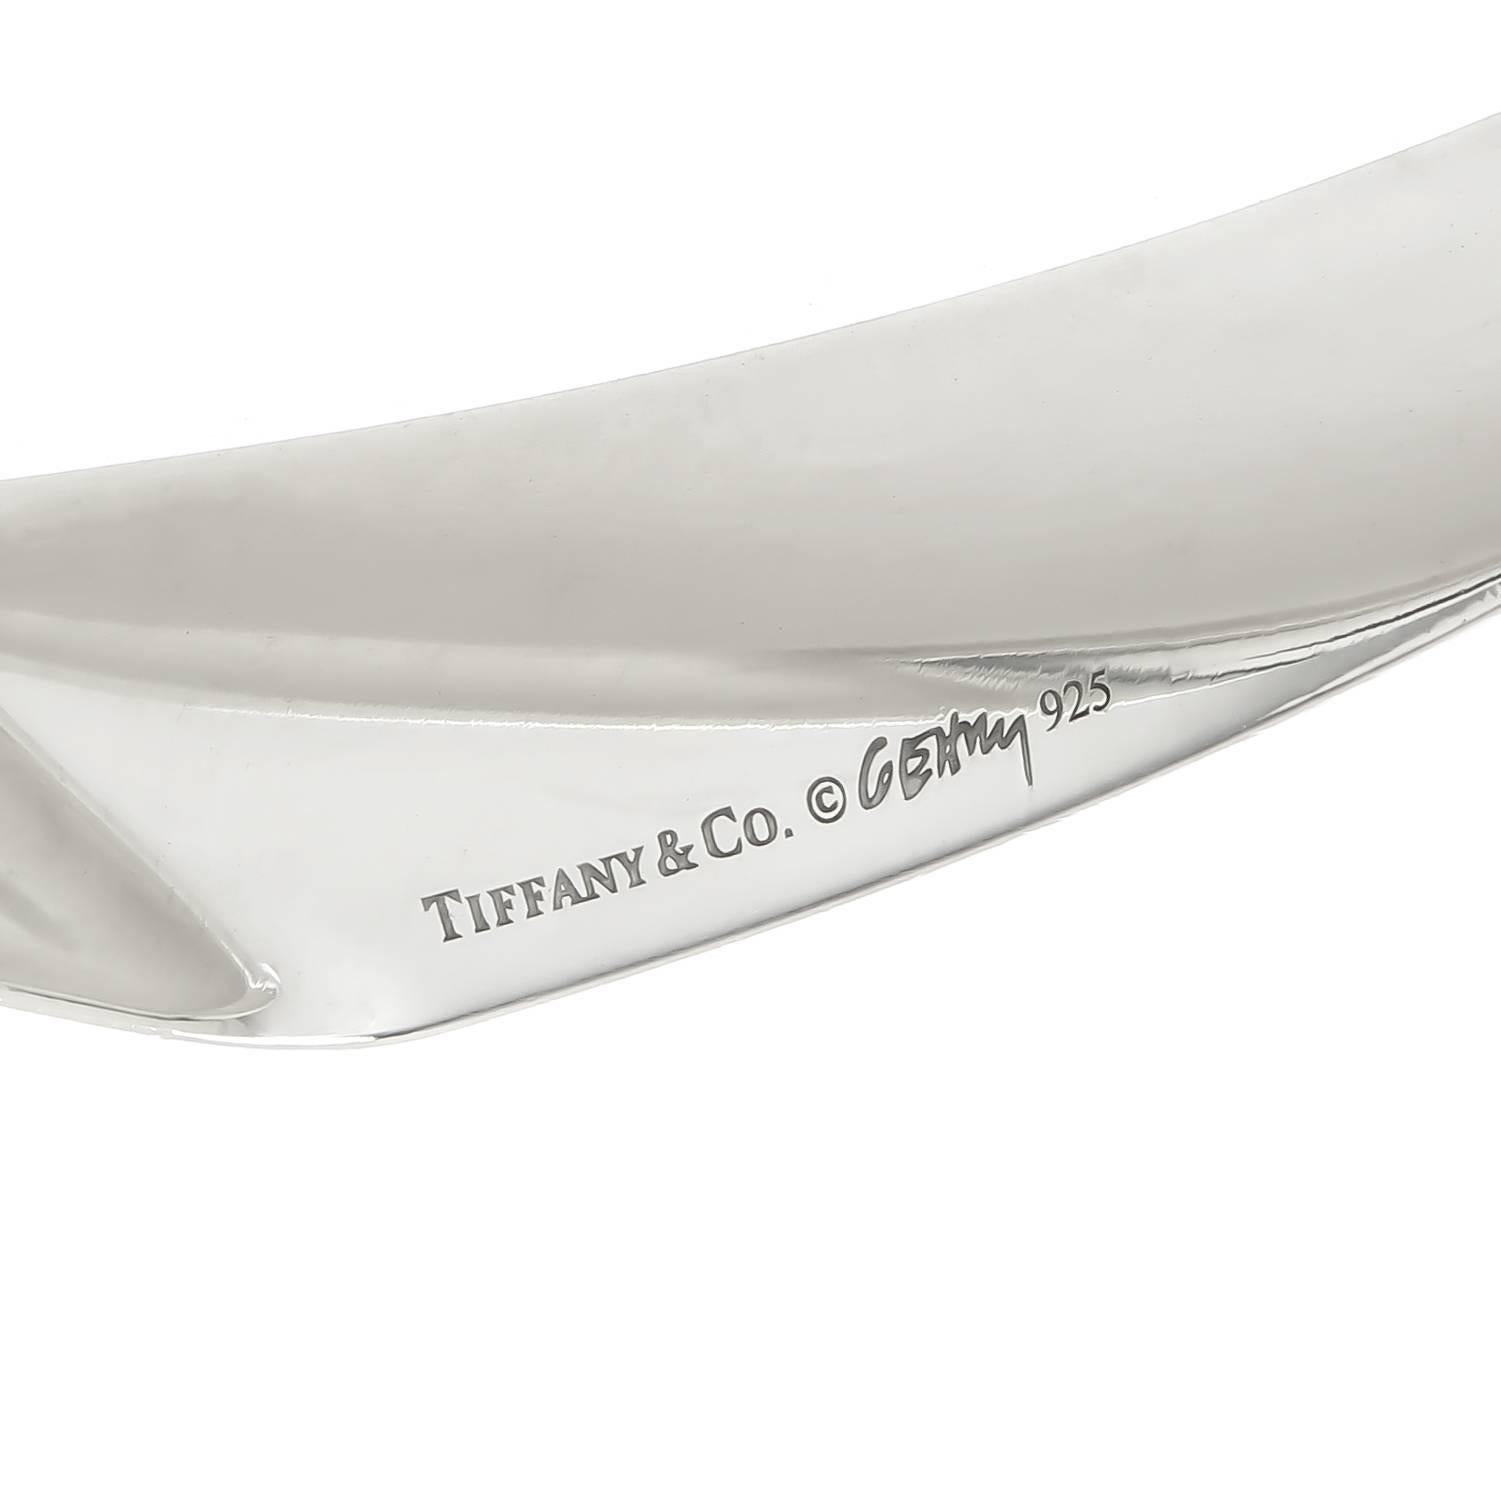 Circa 2010 Frank Gehry for Tiffany & Company Sterling Silver Bangle Bracelet, measuring 1/2 inch wide and having a wrist measurement of 8 Inches. Excellent condition and comes in Tiffany Suede pouch.